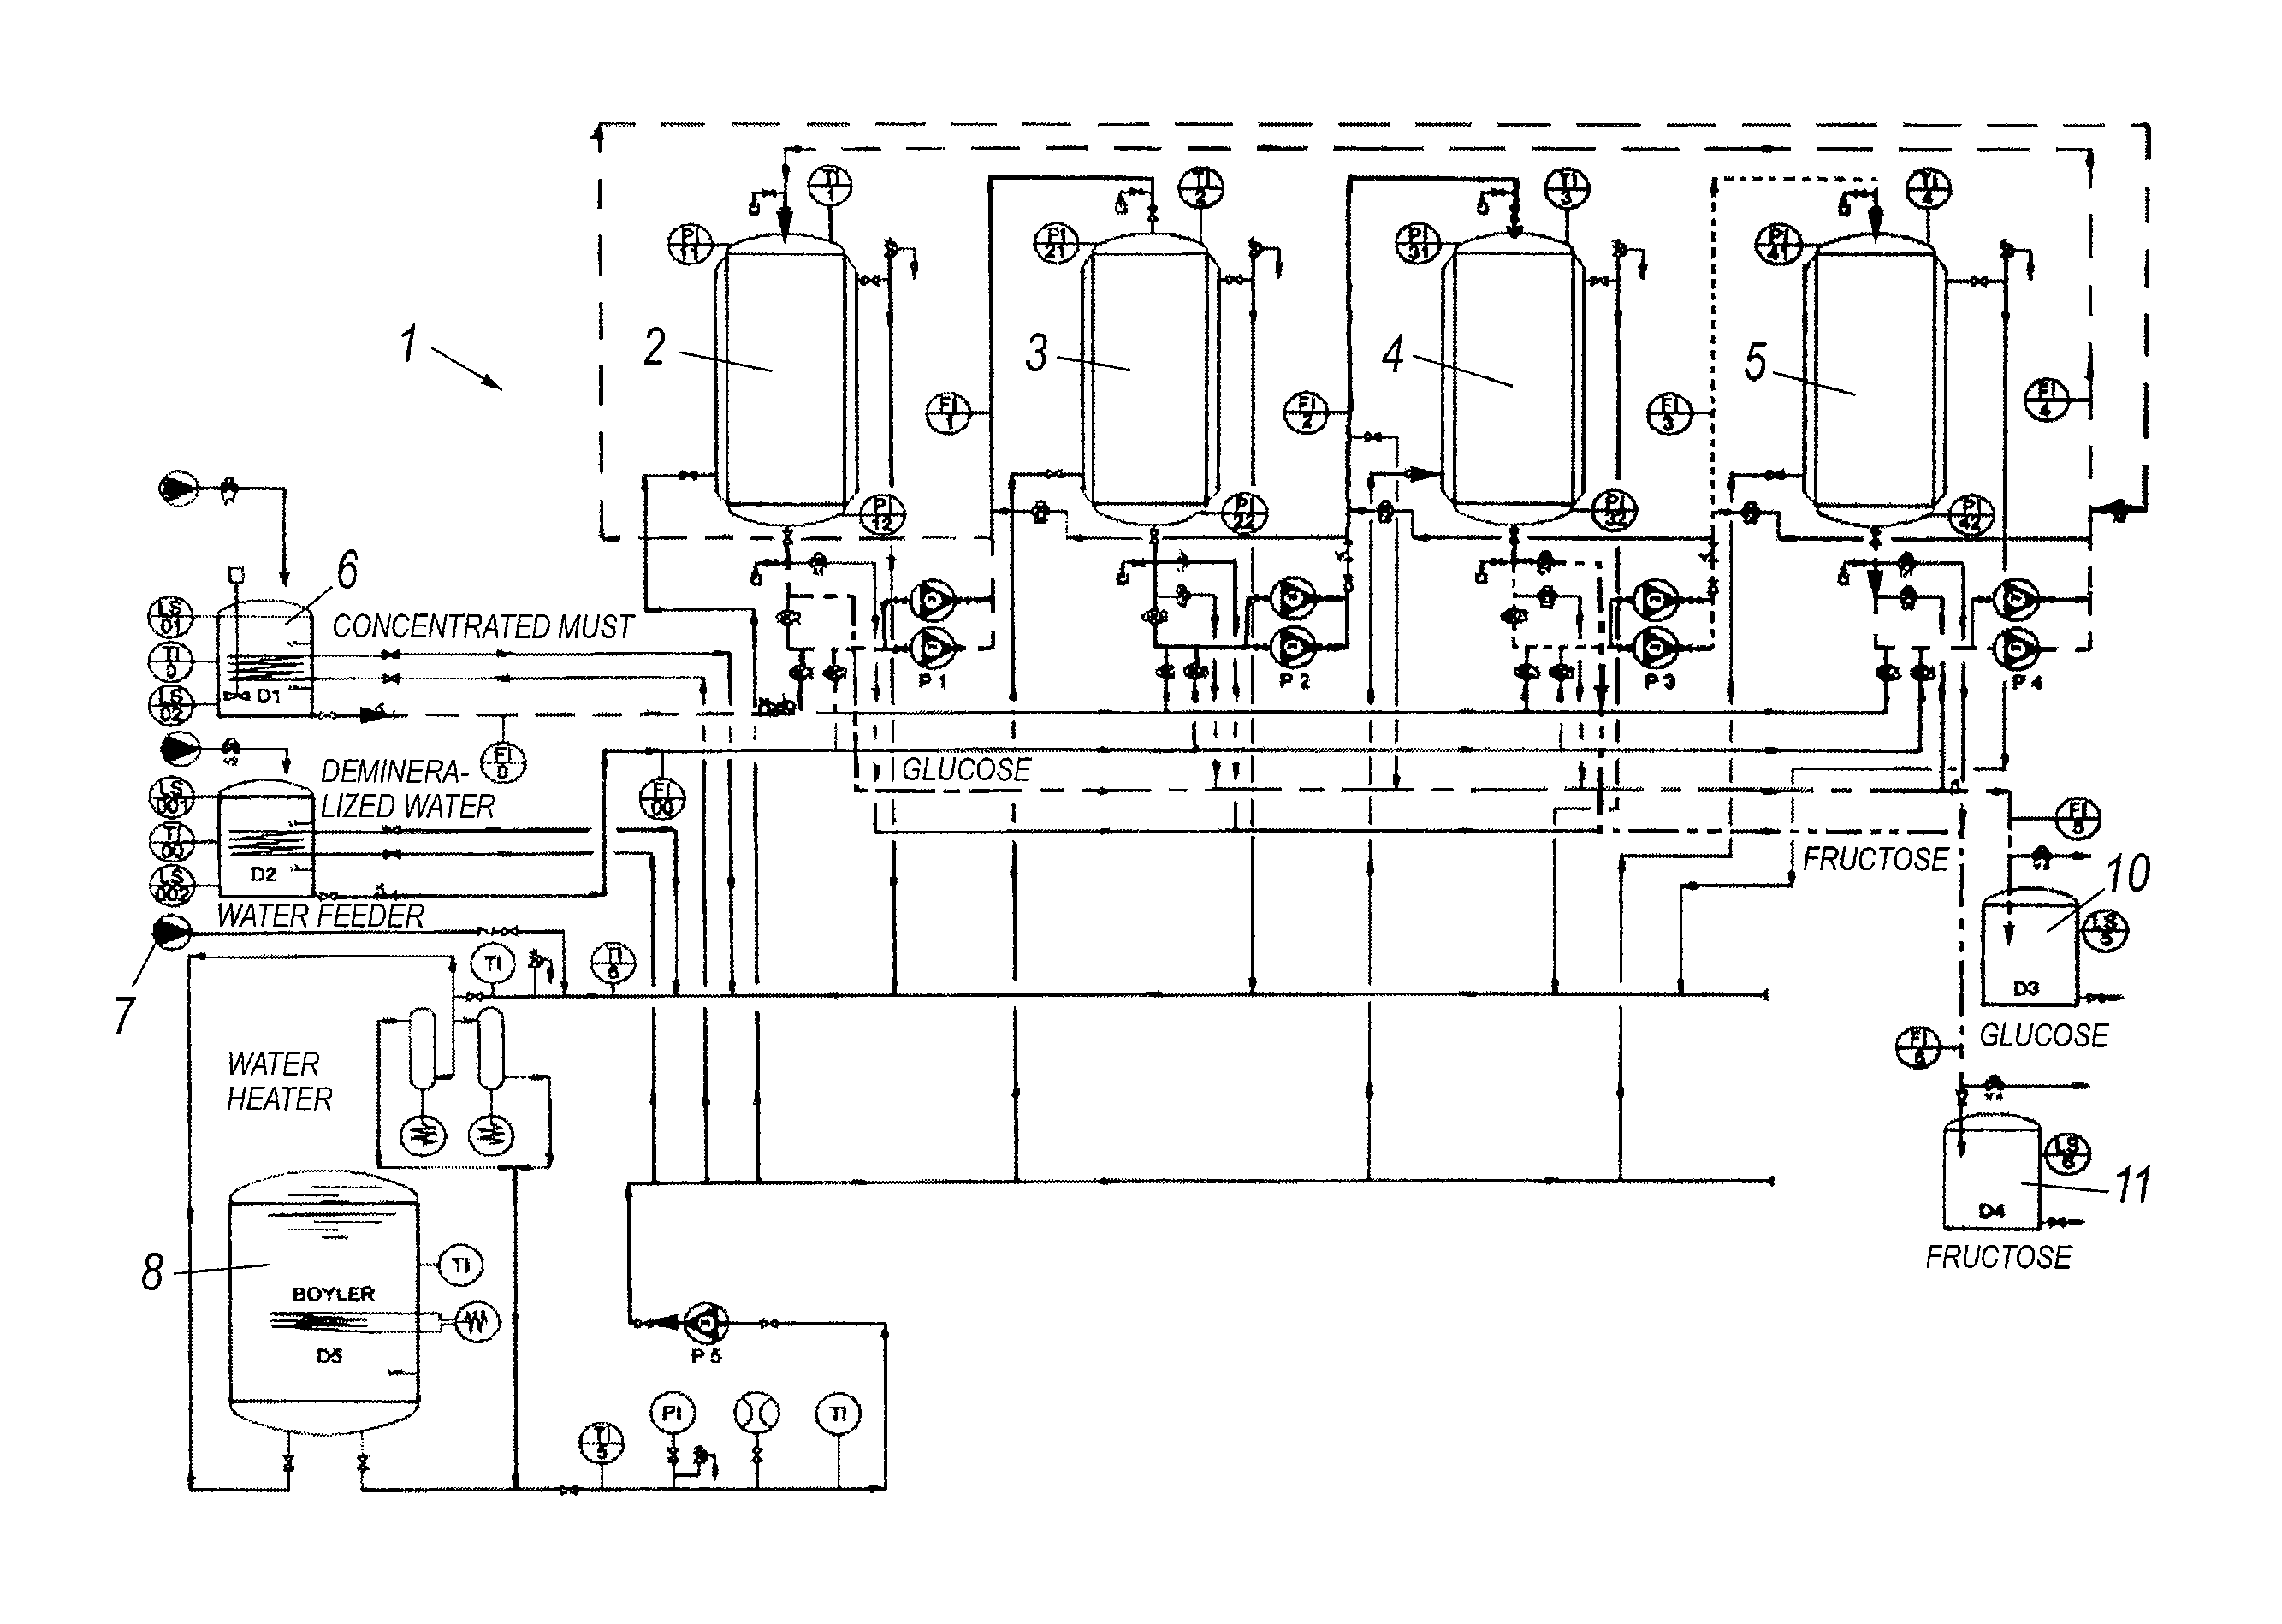 Process and plant for producing sugar products from grapes